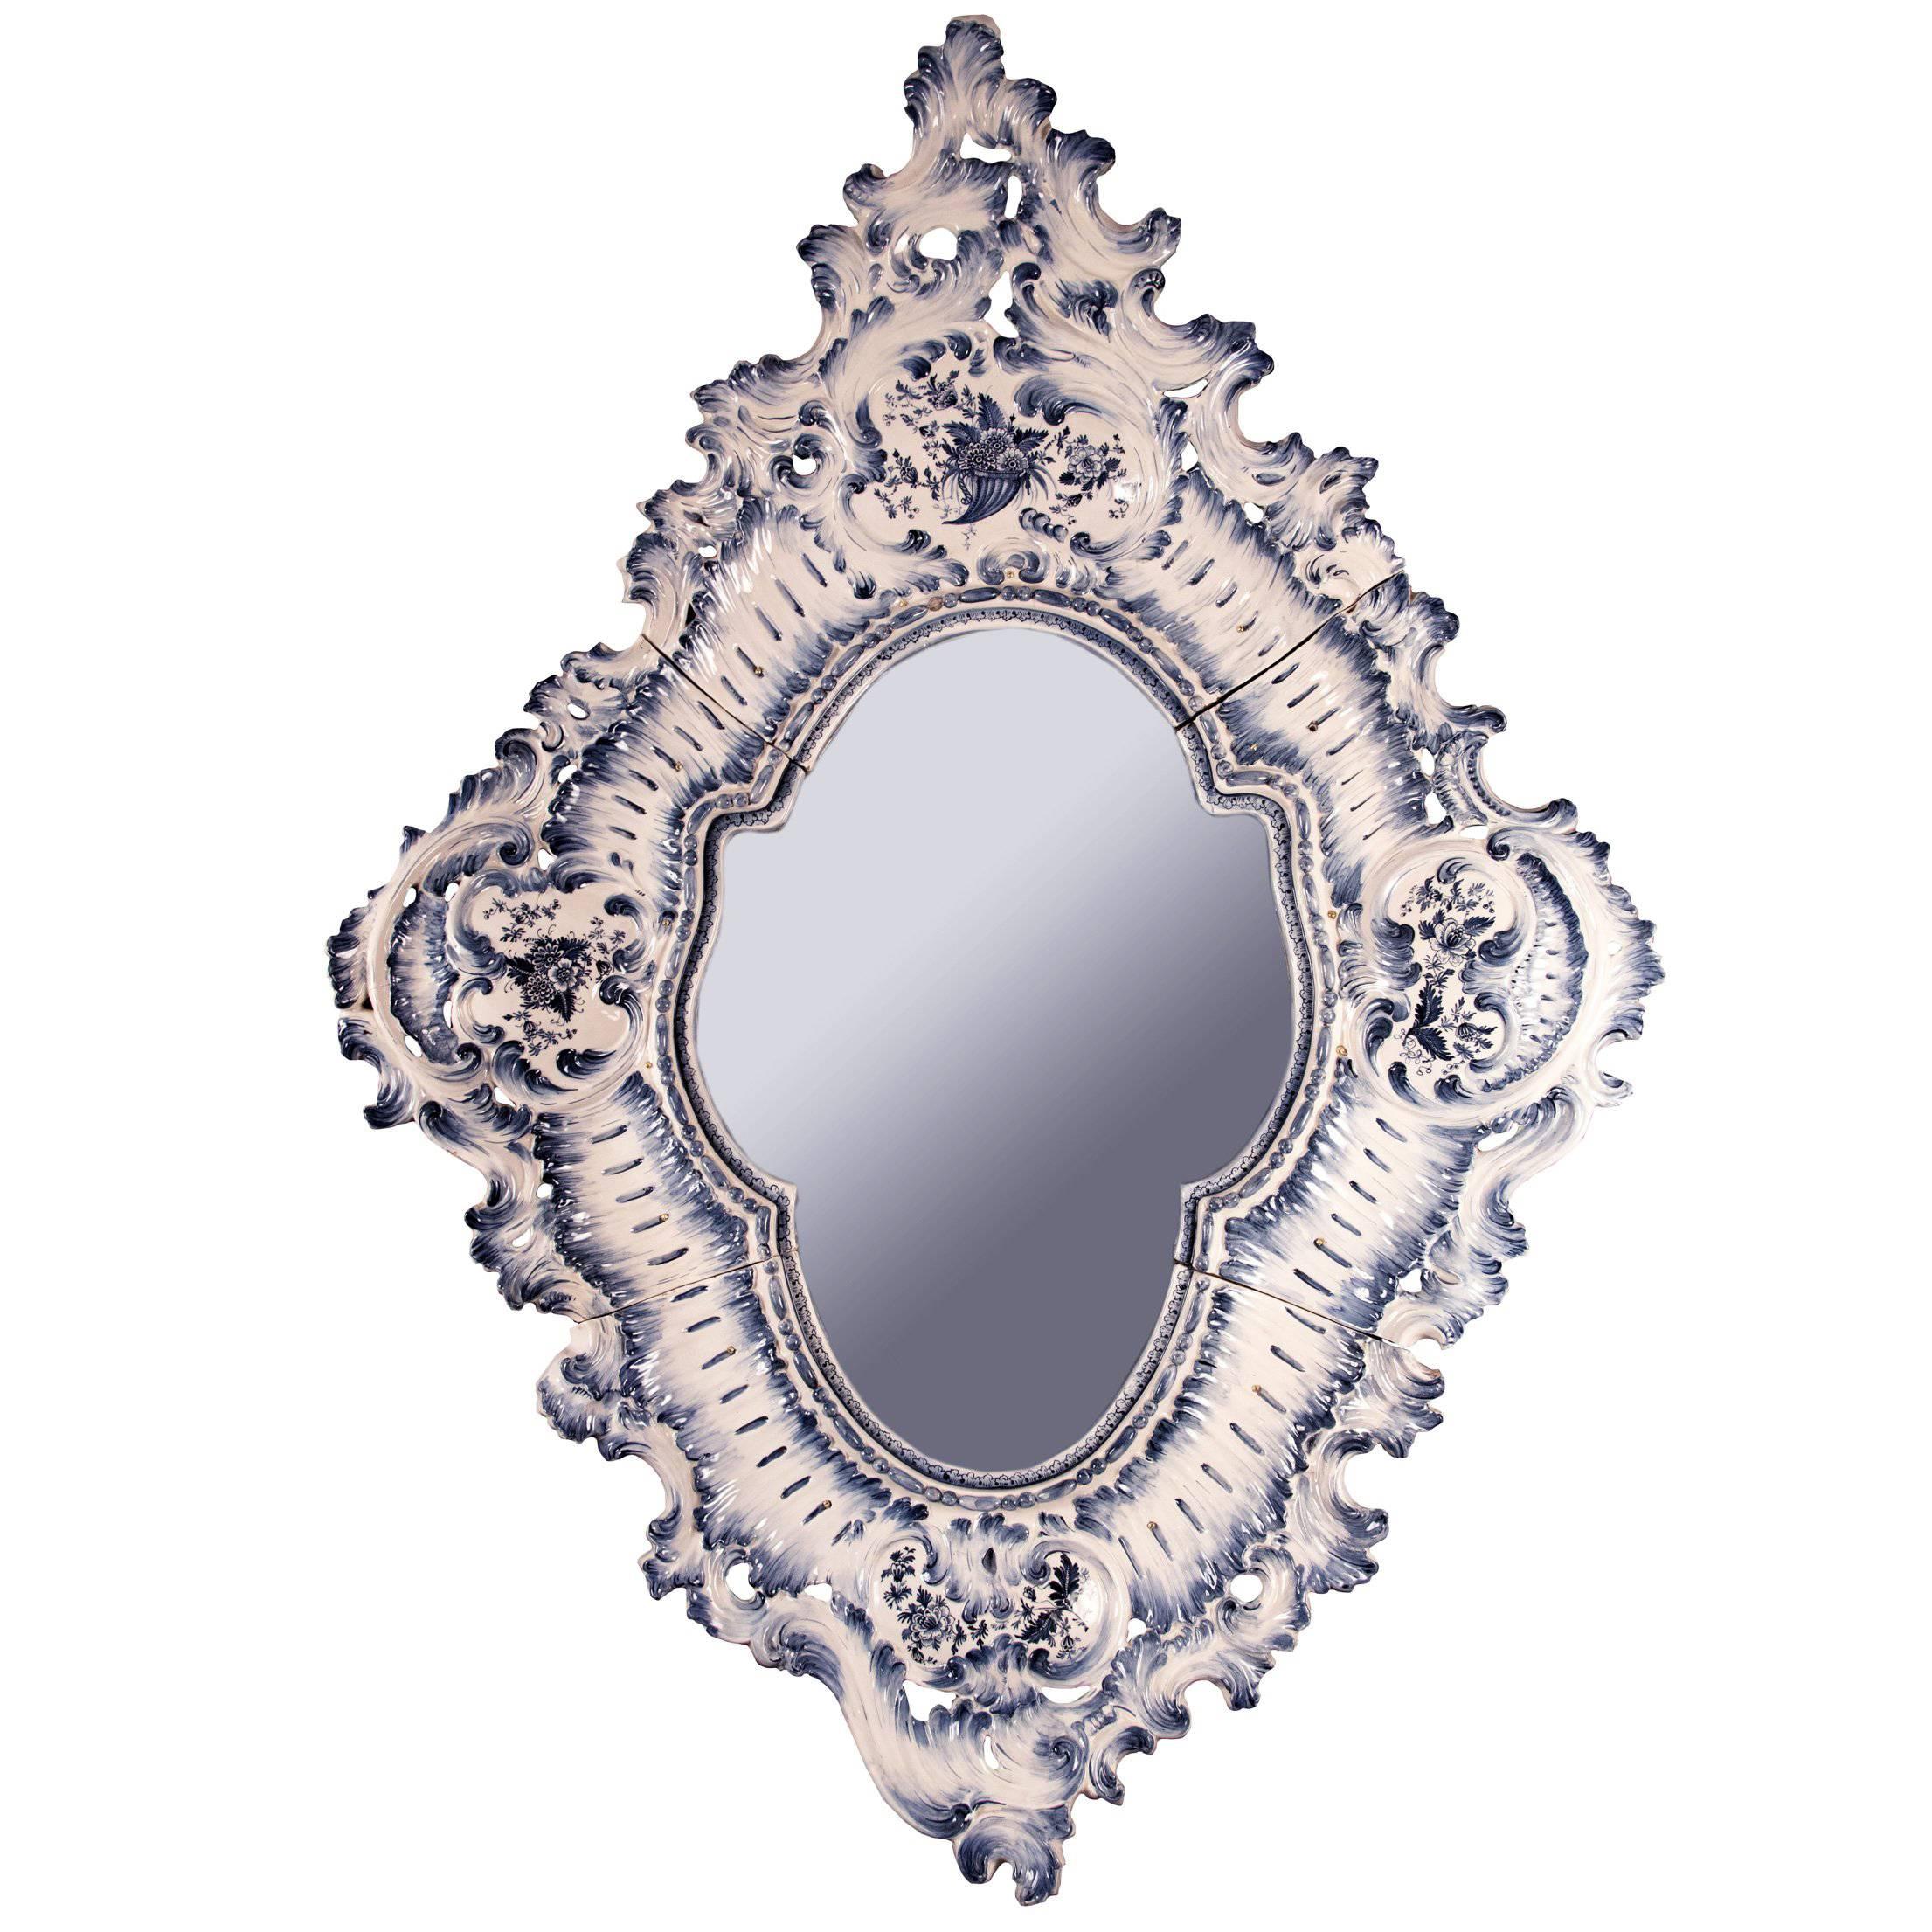 Delft Porcelain Rococo-style Mirror with Metal Mirror Plate